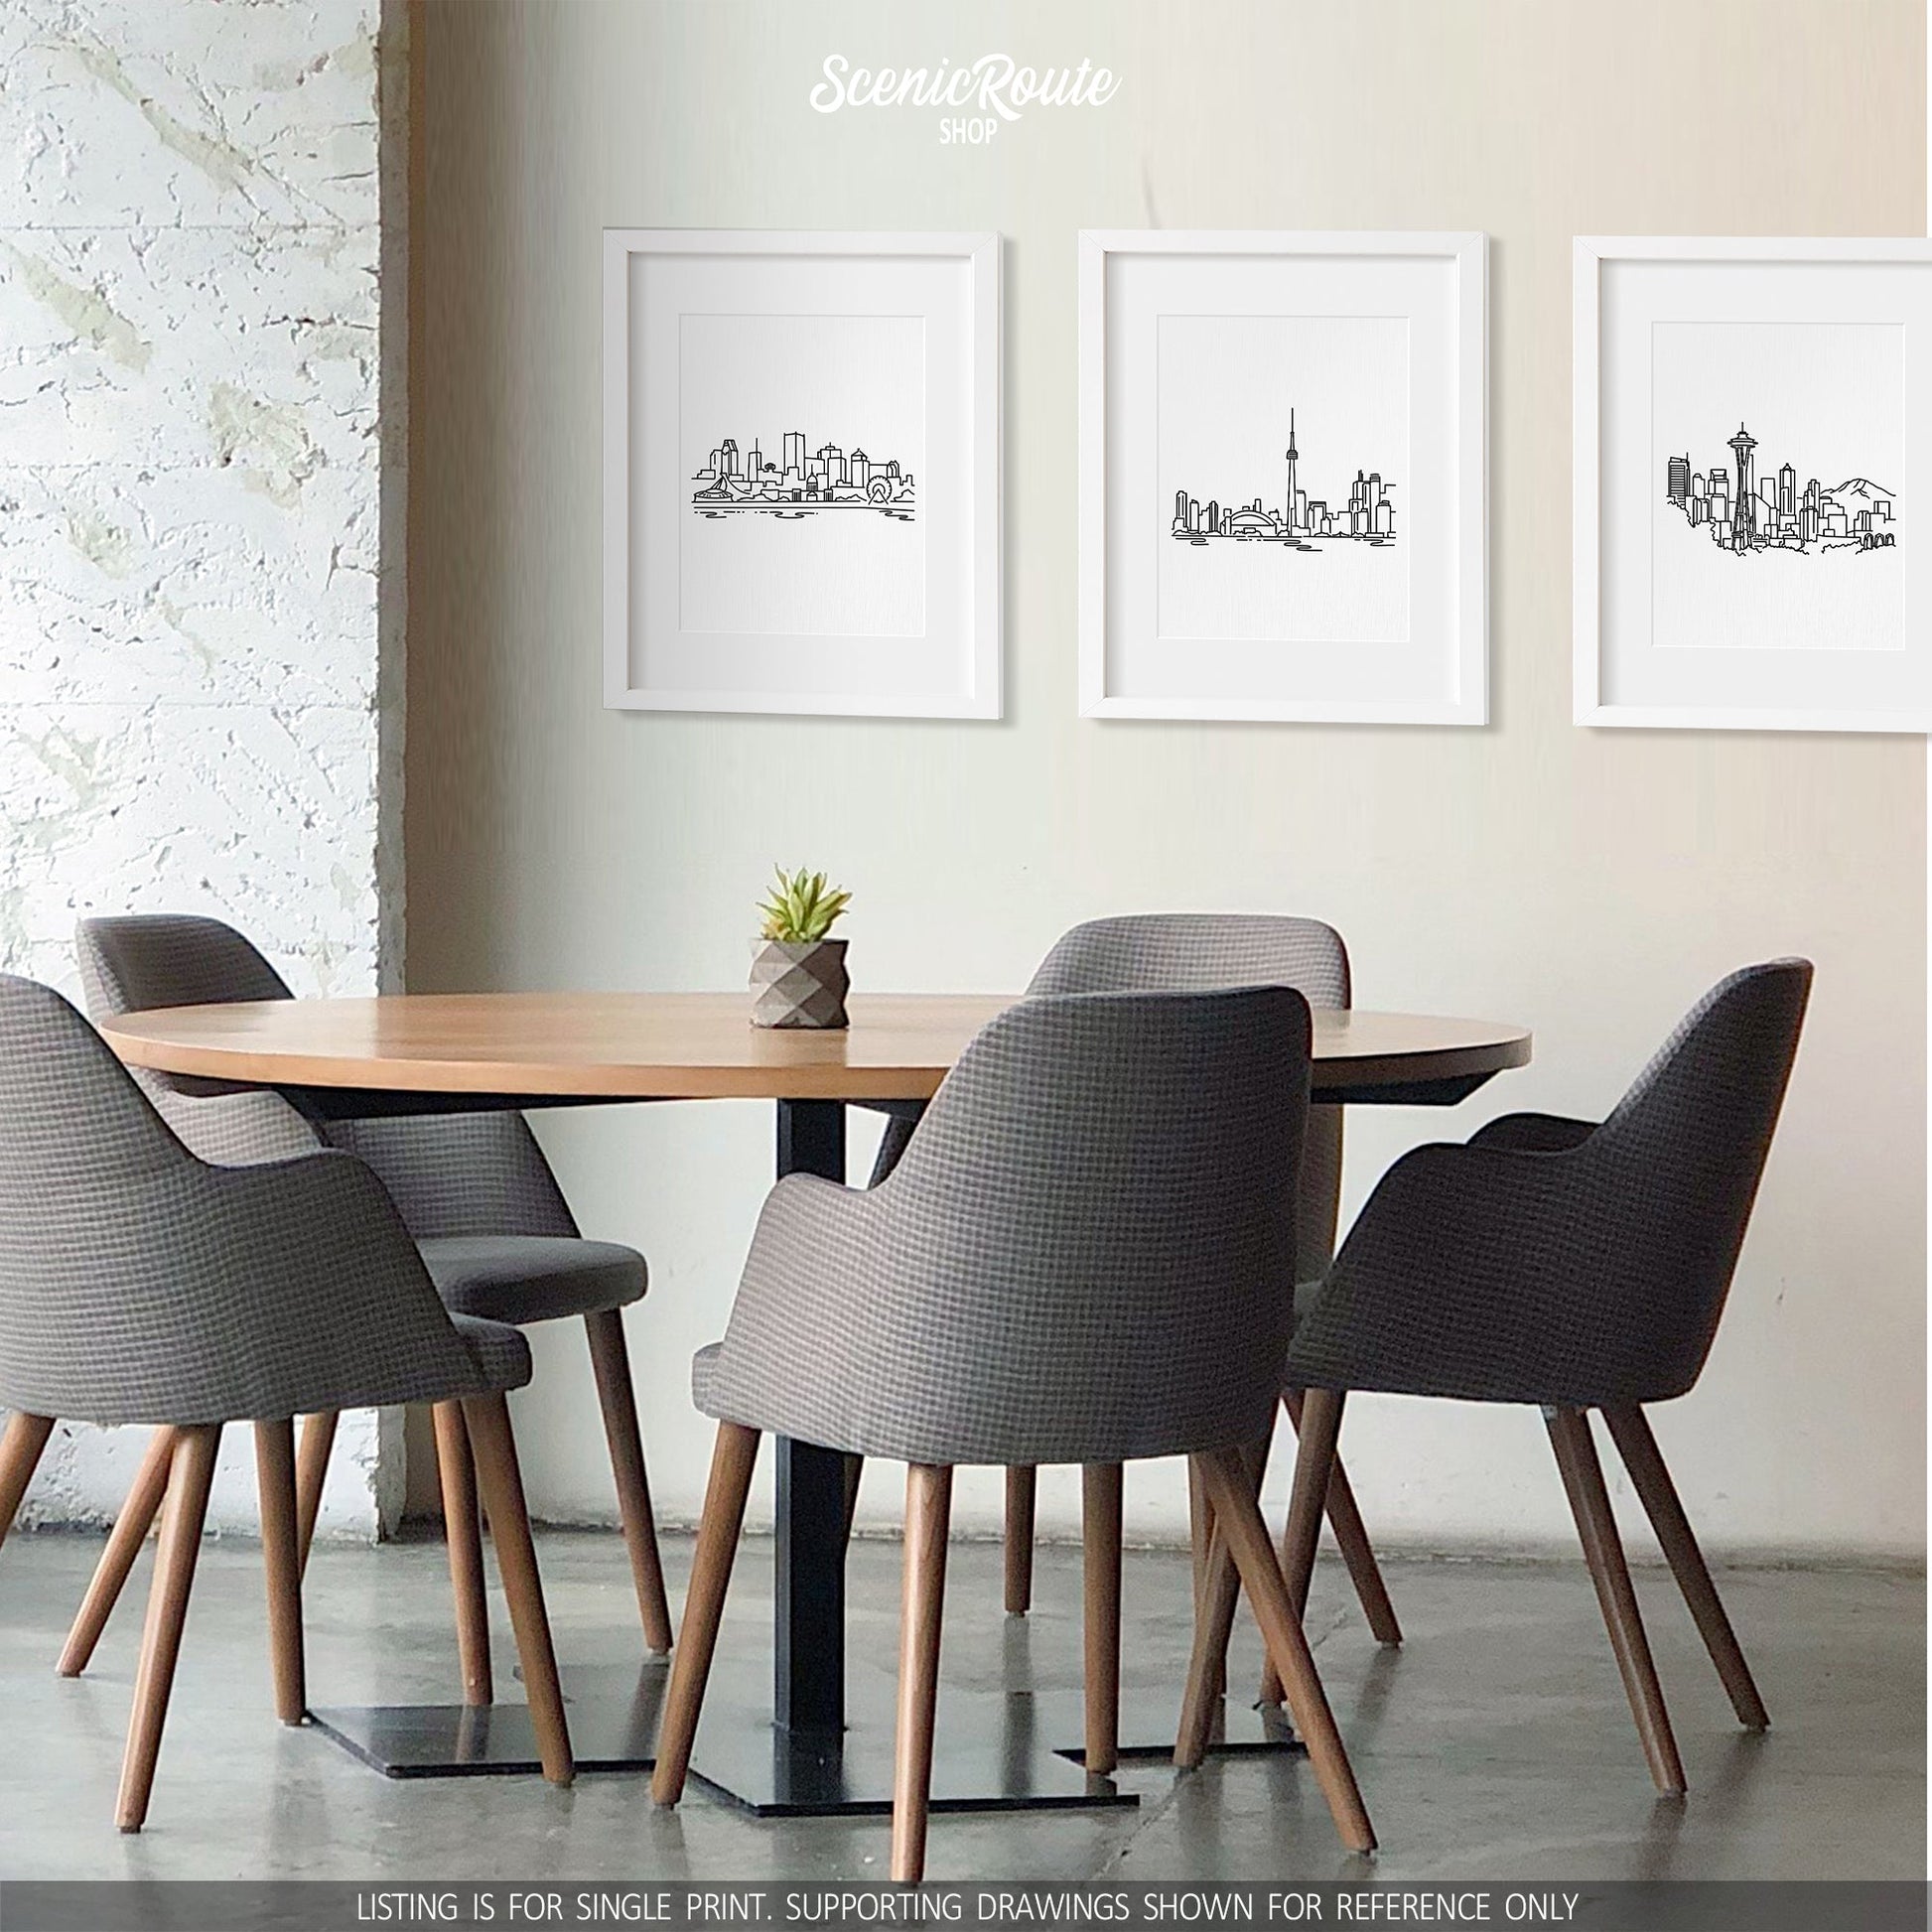 A group of three framed drawings above a dining table and chairs. The line art drawings include the Montreal Skyline, Toronto Skyline, and Seattle Skyline